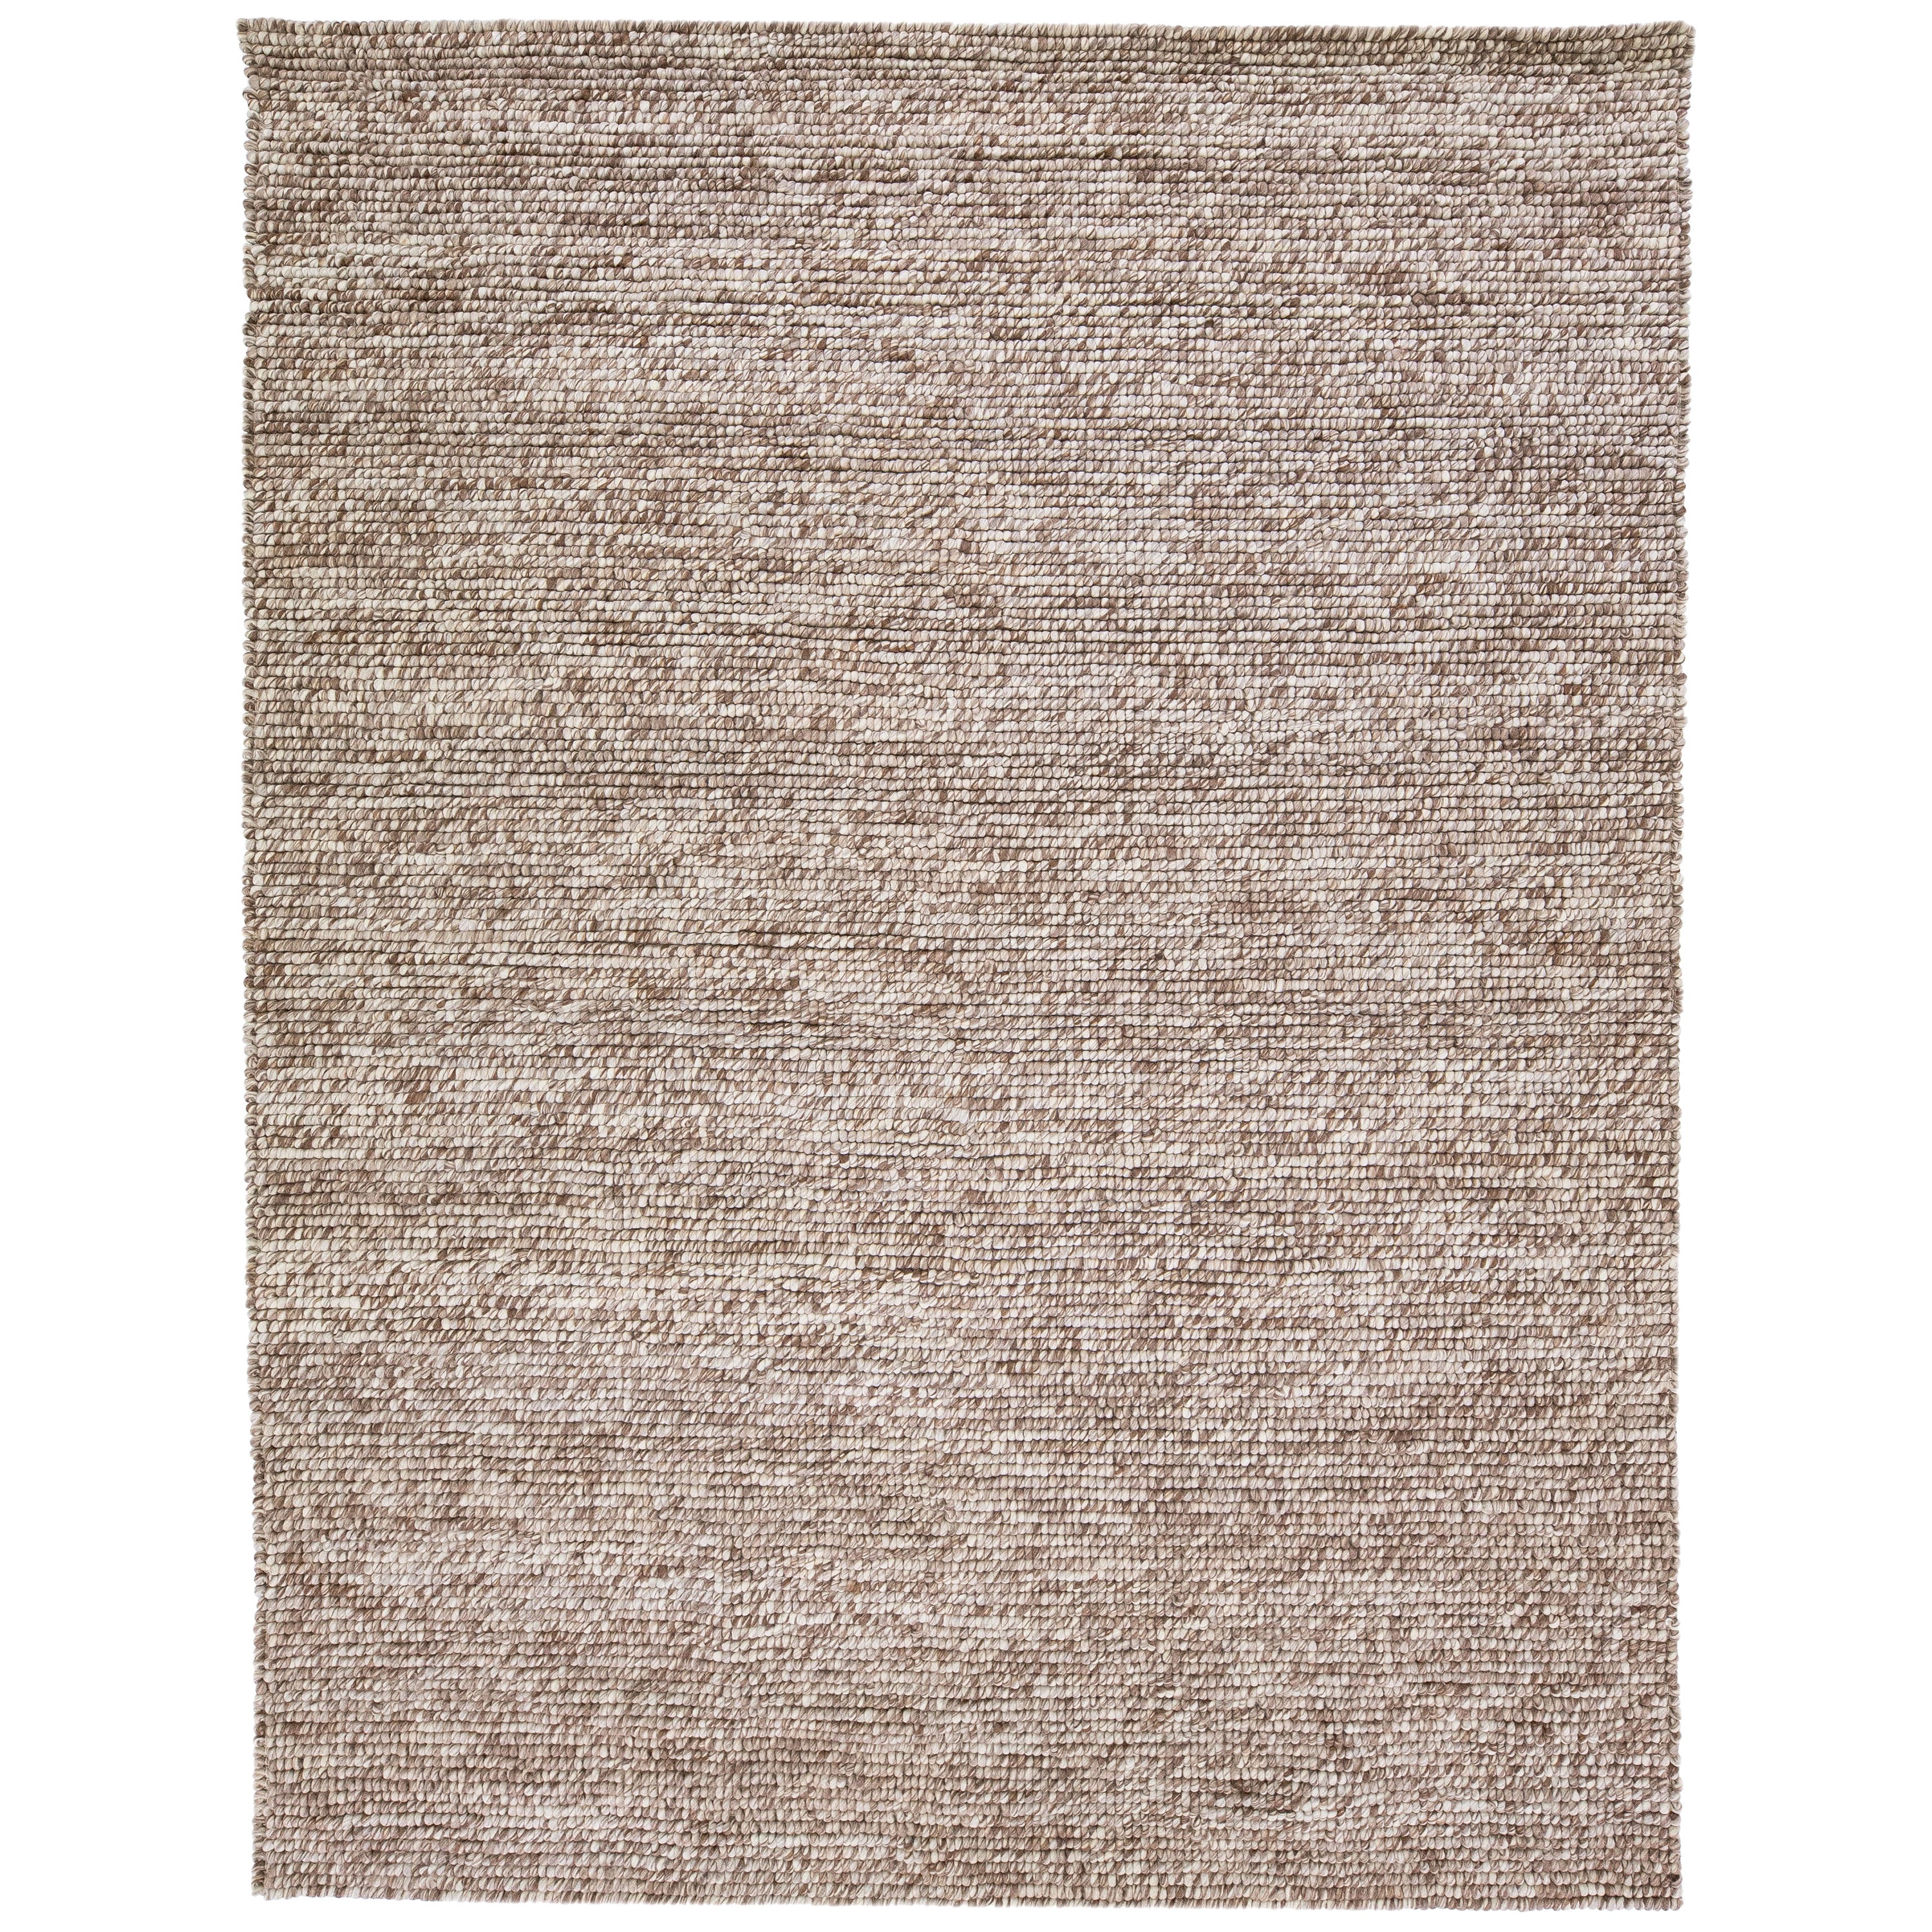 Brown Contemporary Handmade Felted Wool Rug by Apadana For Sale